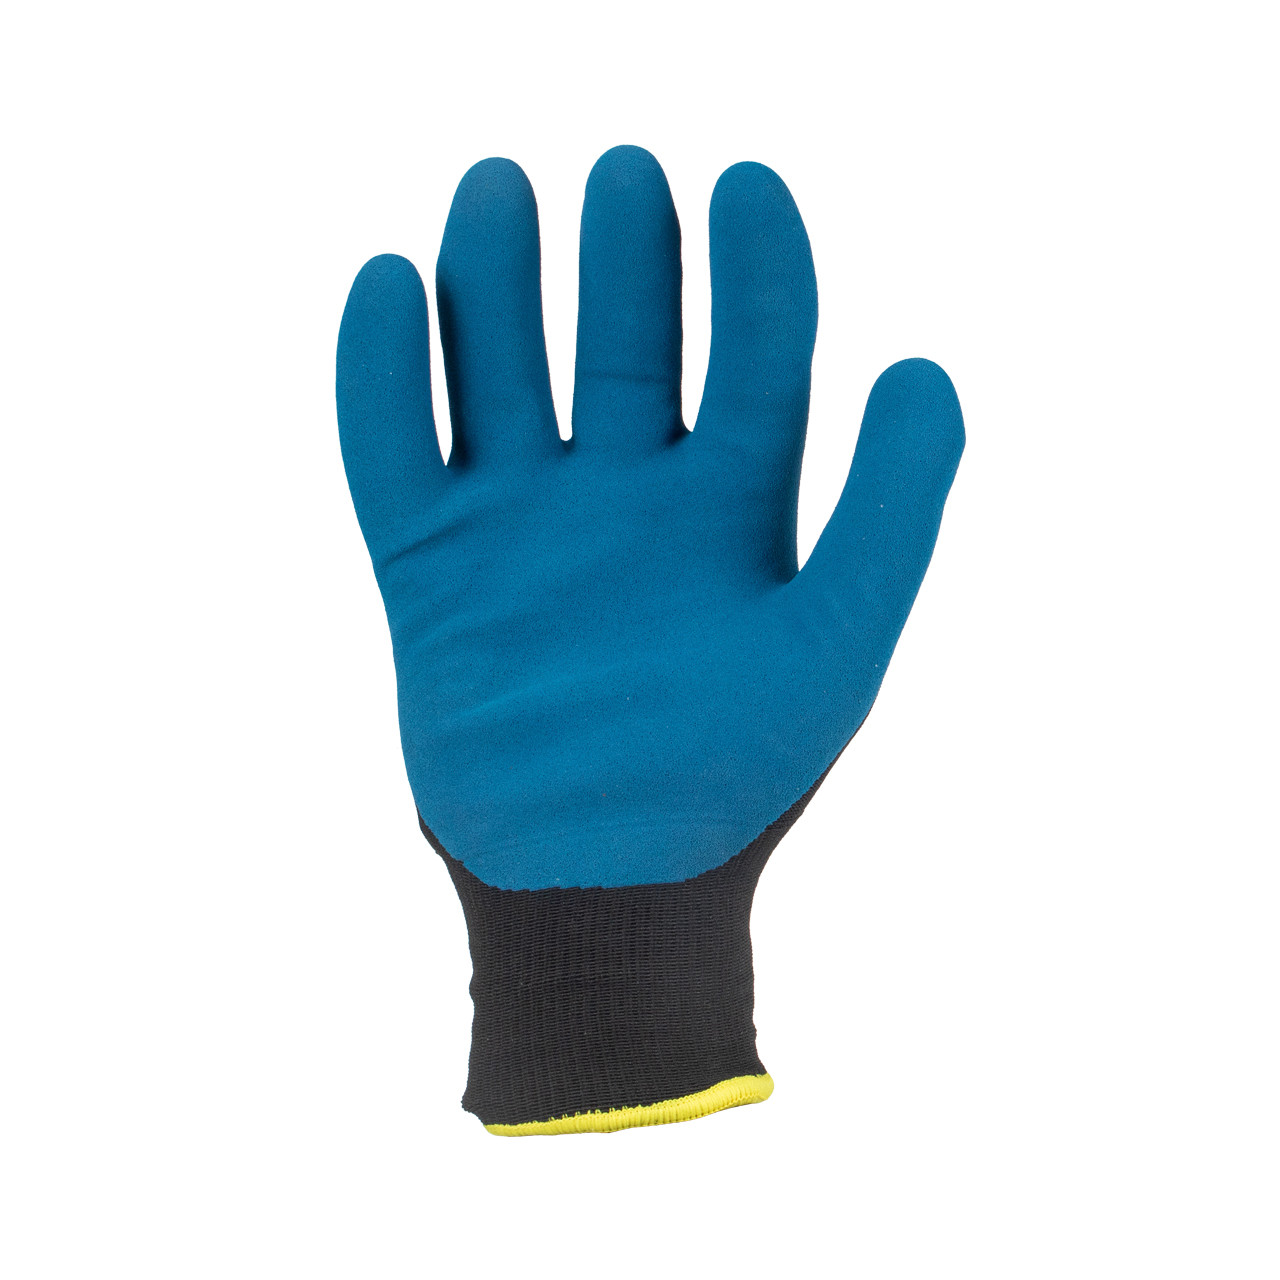 Ironclad Knit A2 Insulated Nylon Latex Gloves (12 Pairs) from Columbia Safety